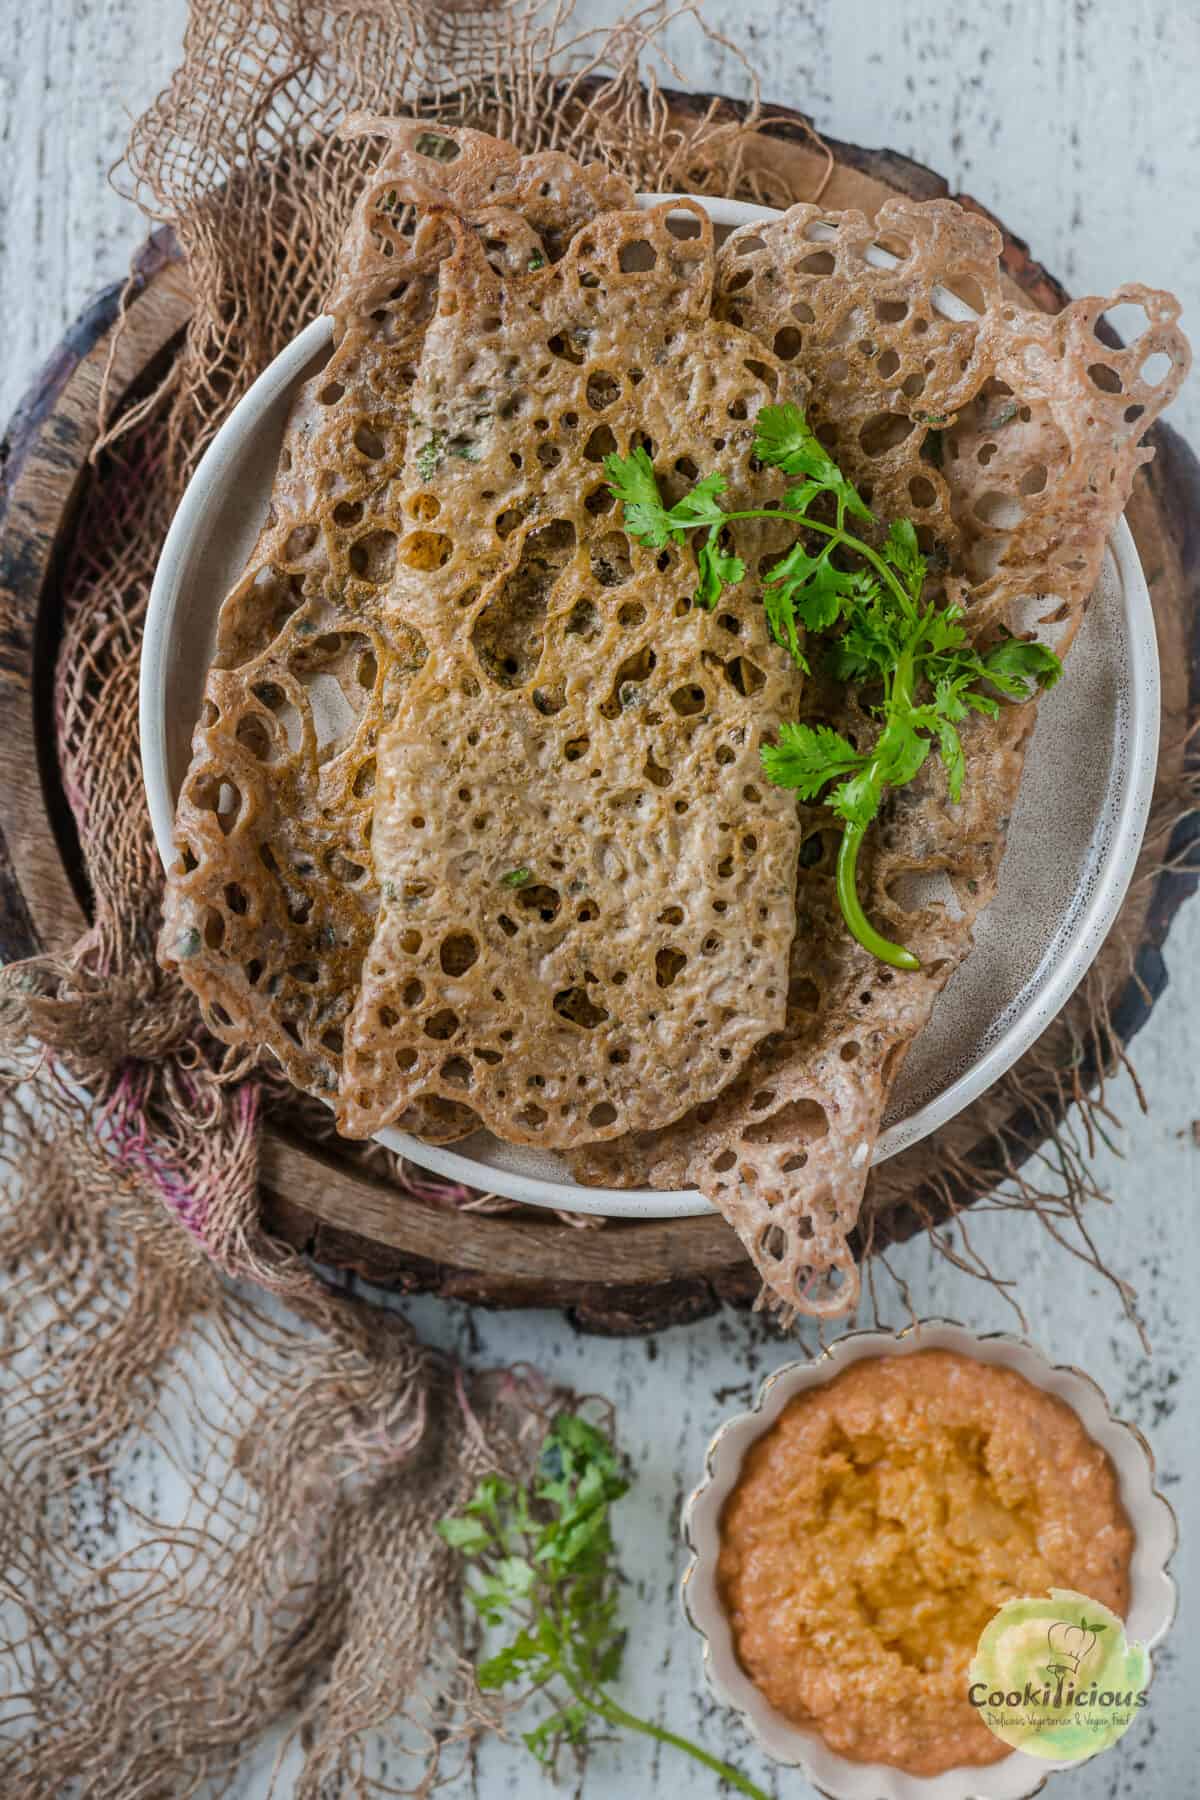 French buckwheat galette served in a plate.